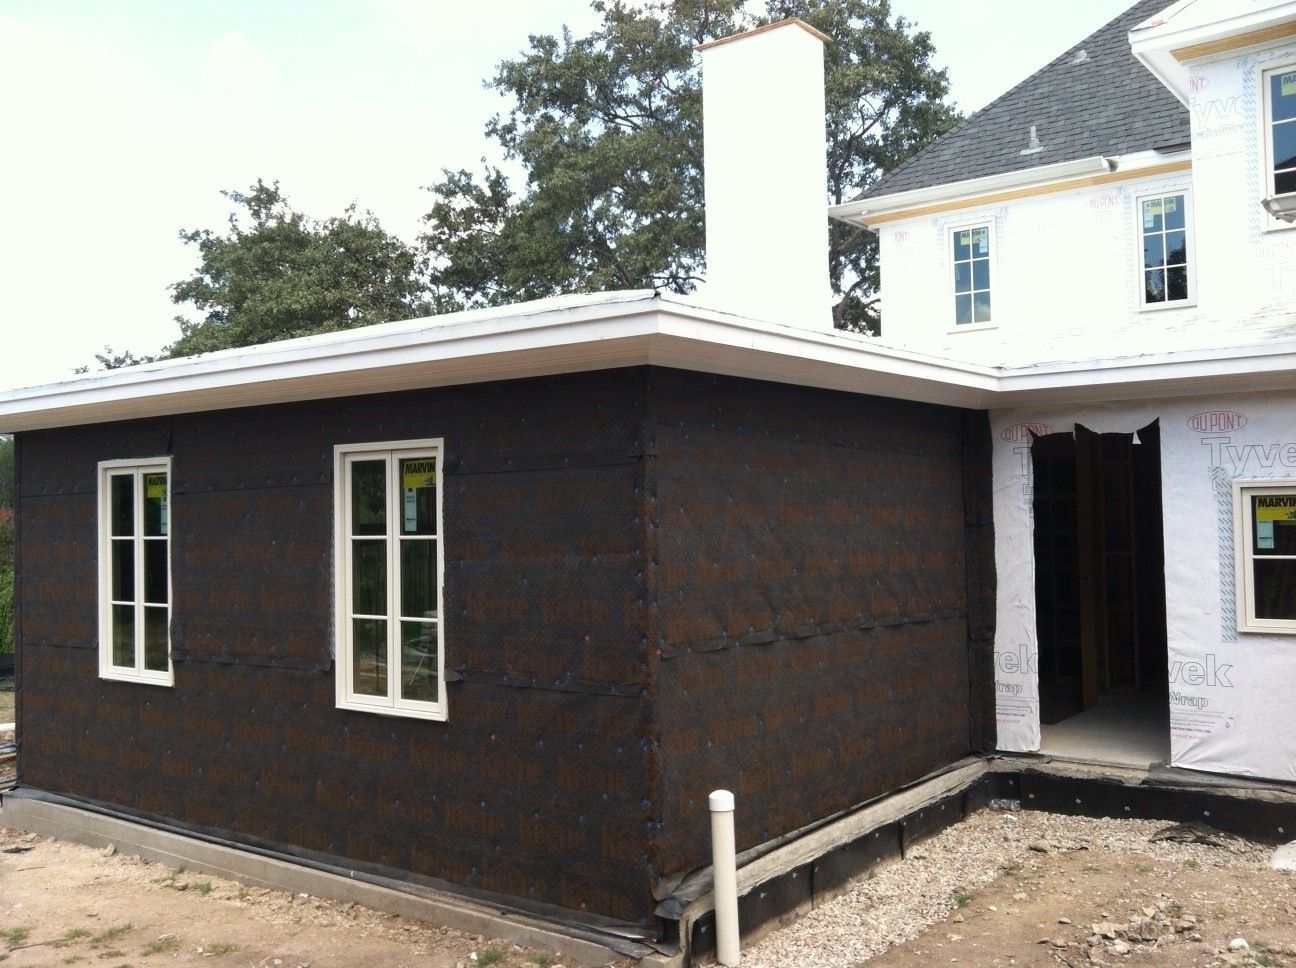 Keene Driwall laid directly over the fully detailed Tyvek weather barrier.